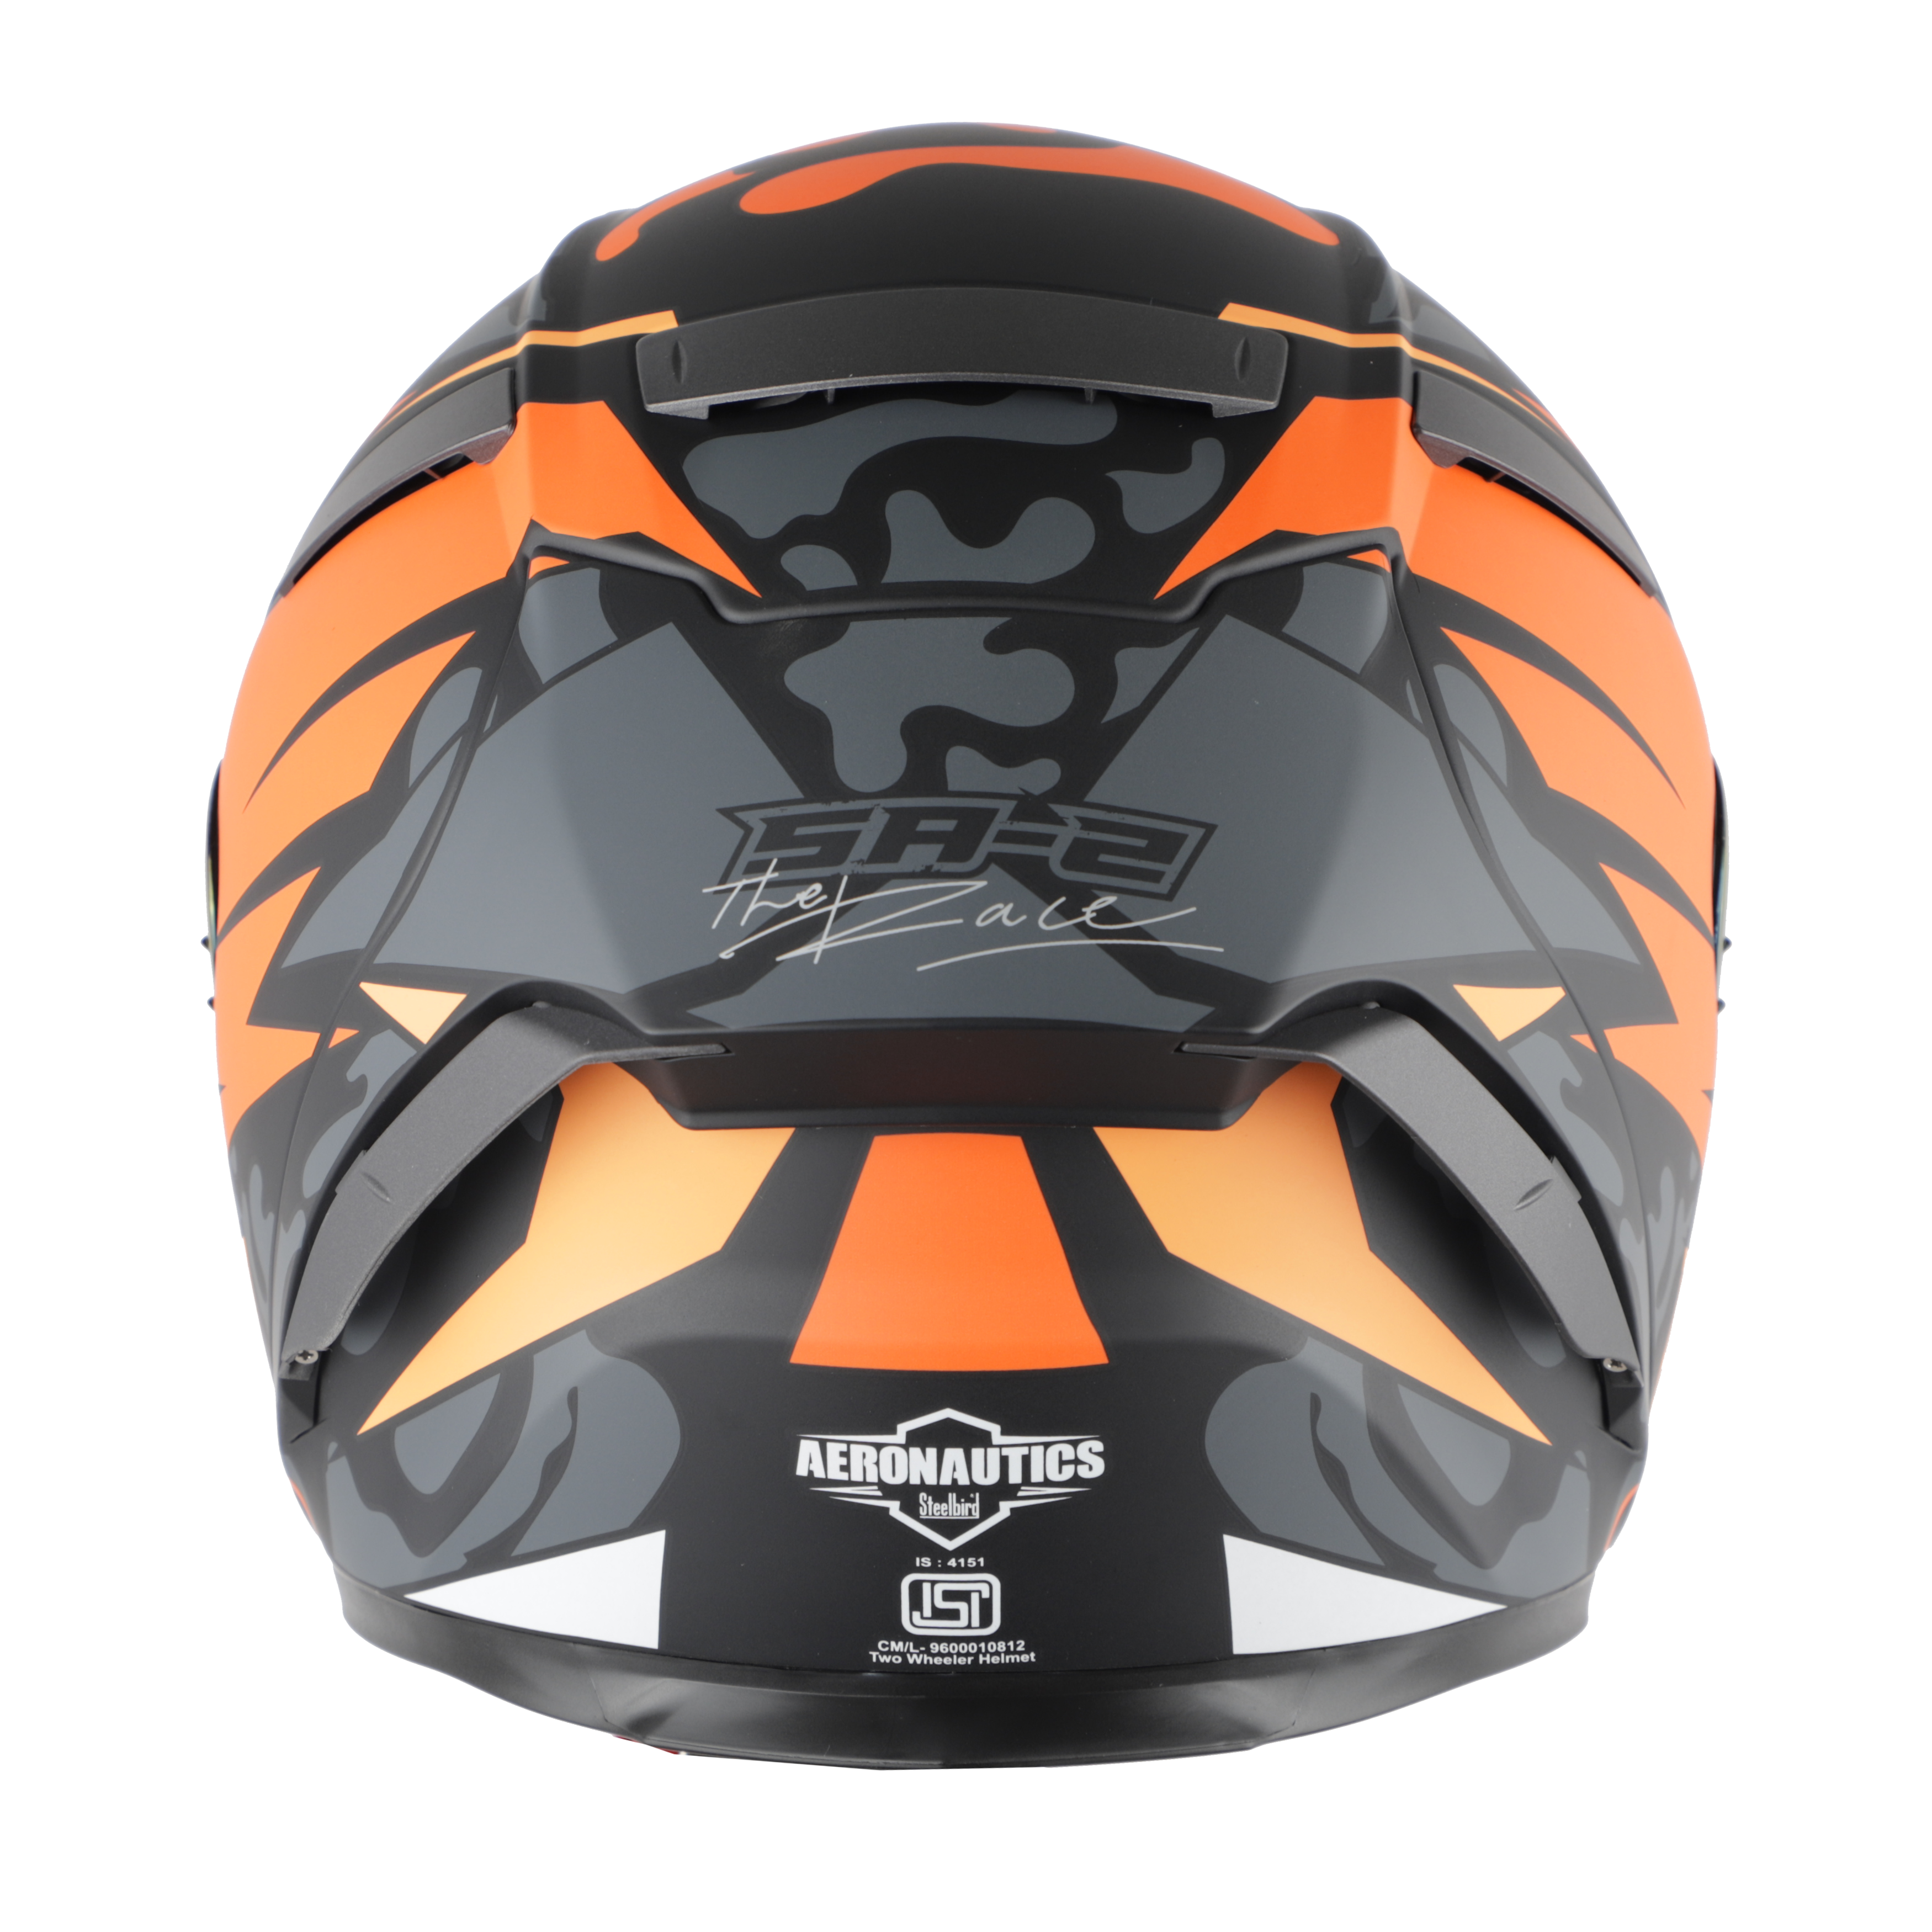 SA-2 TERMINATOR 3.0 MAT BLACK WITH ORANGE FITTED WITH CLEAR VISOR EXTRA SMOKE VISOR FREE (WITH ANTI-FOR SHIELD HOLDER)